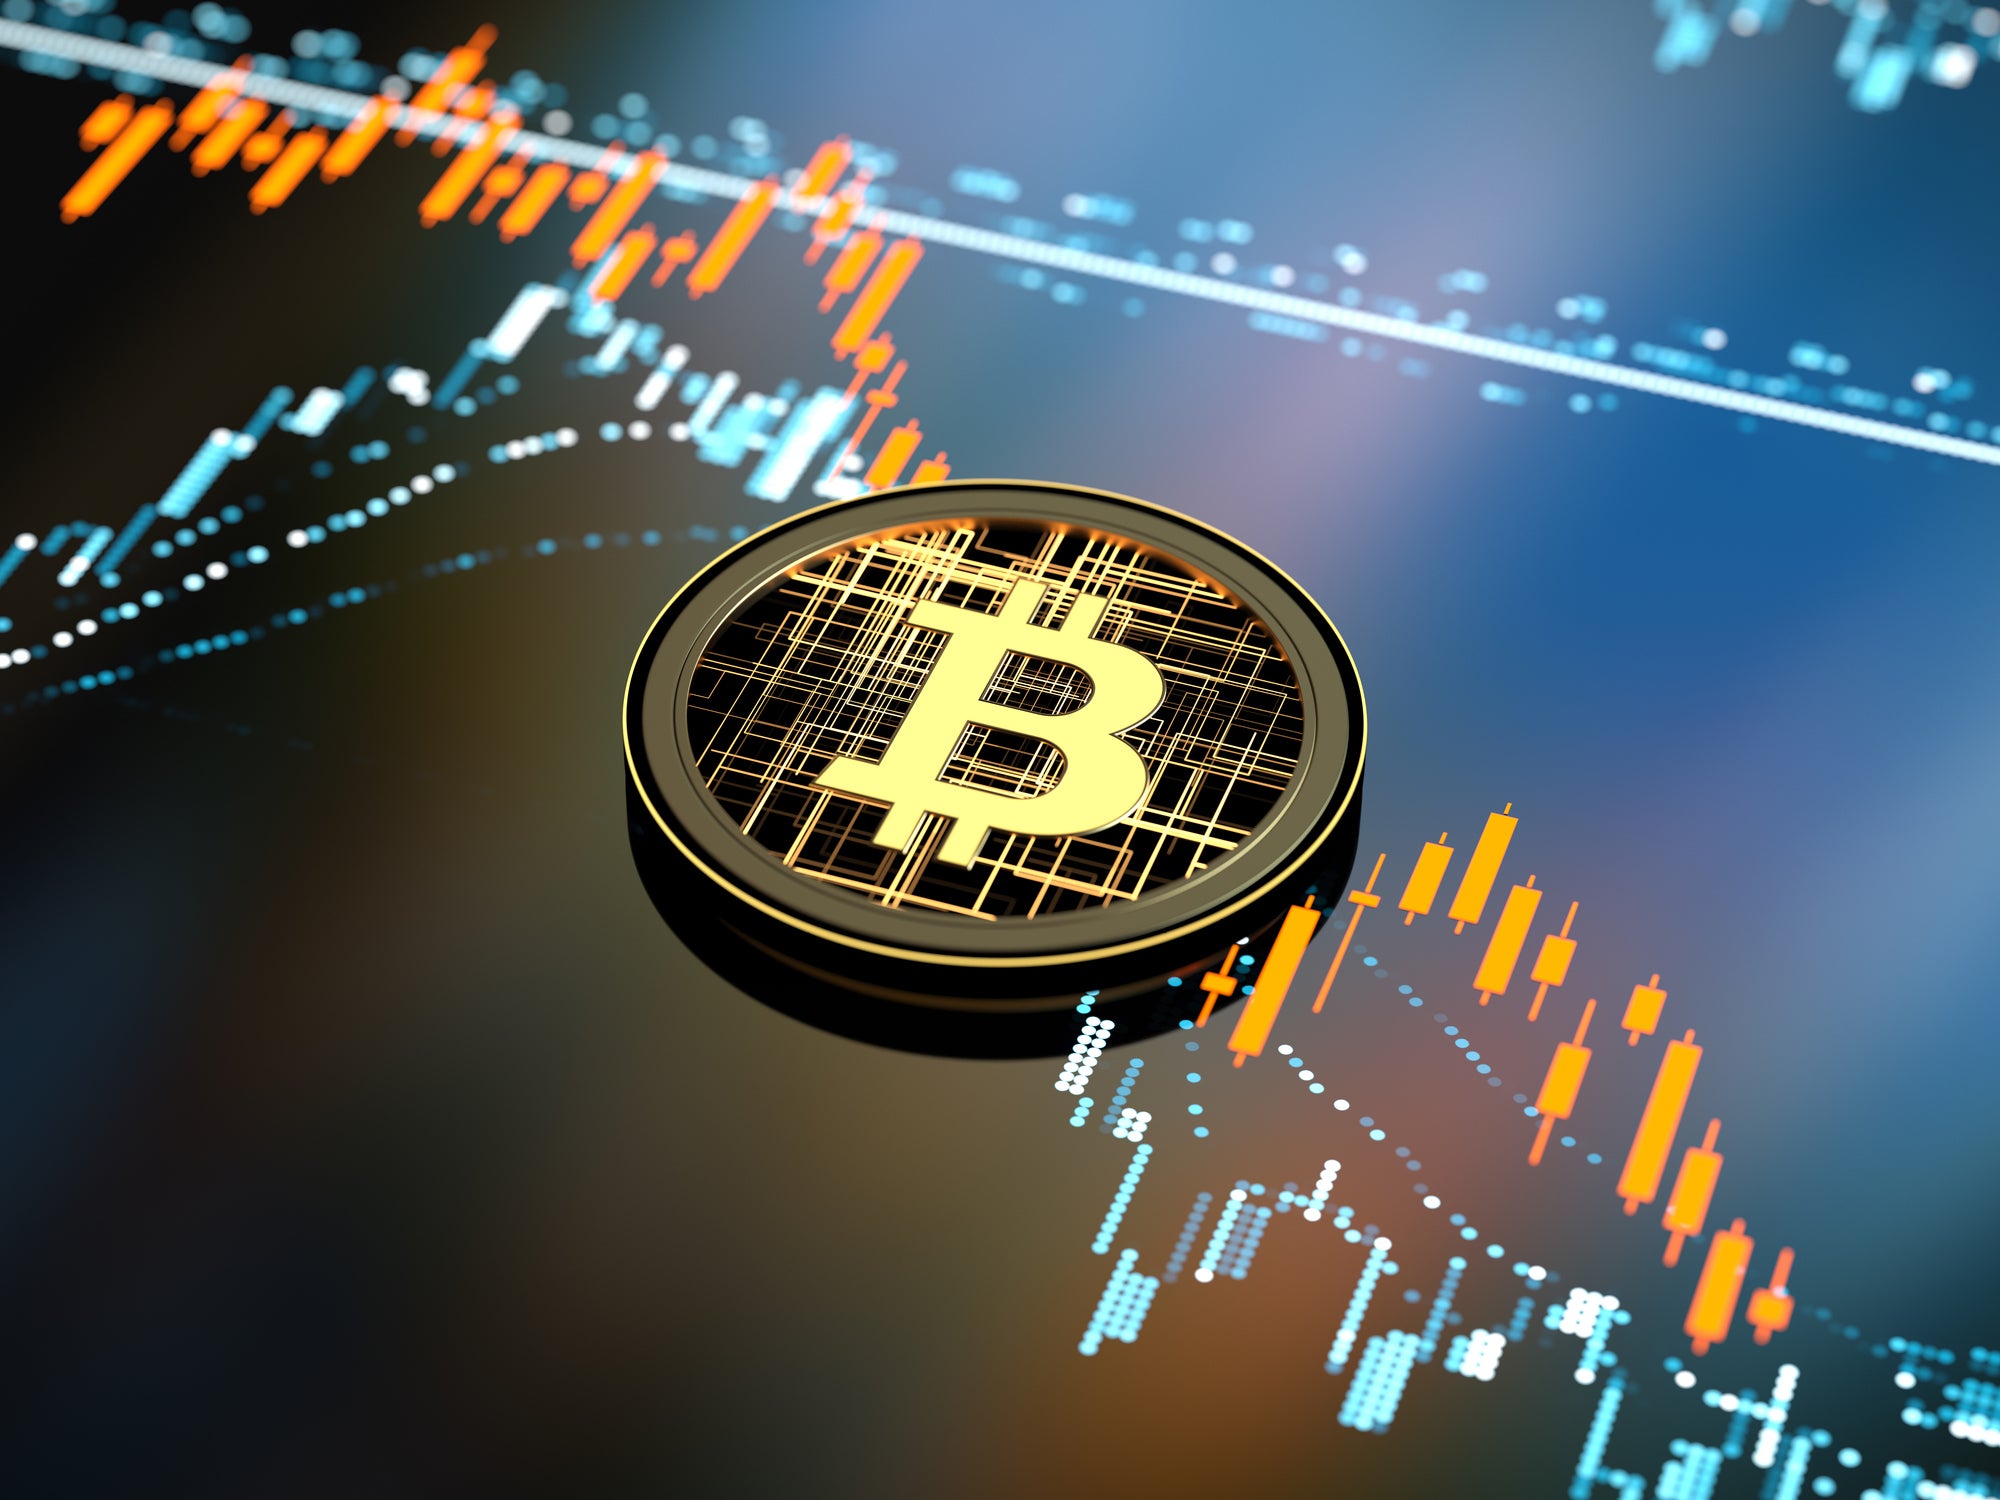 Bitcoin, bitcoins, buy bitcoin, bitcoin news, bitcoin news, etherium, etherium news, bitcoin blog, smart contract, smart contracts